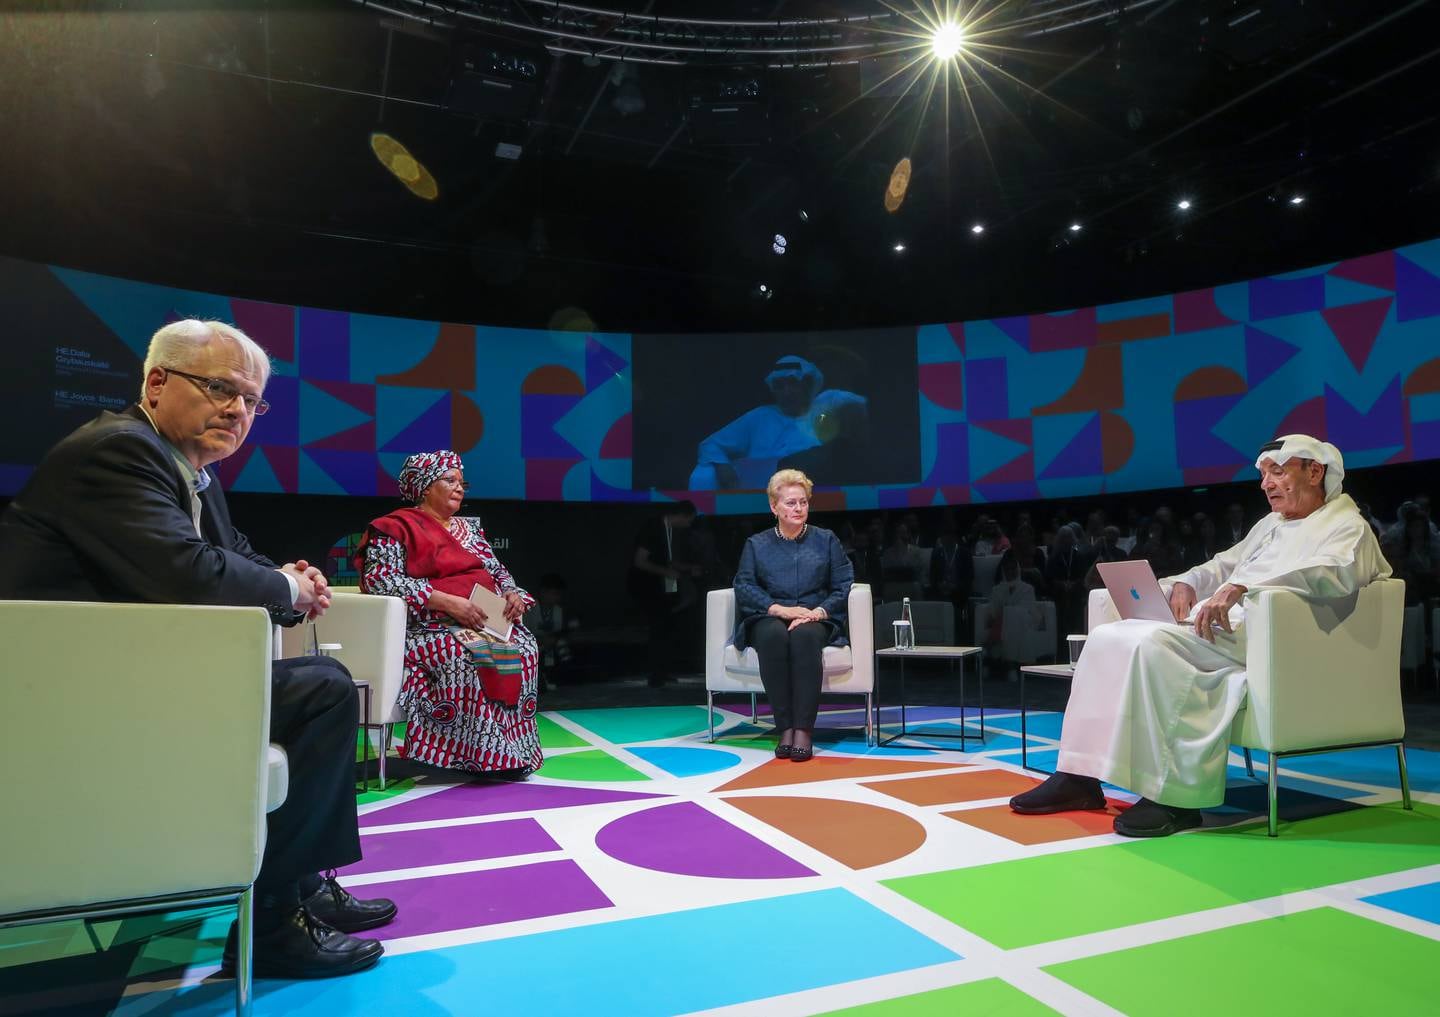 The speech was followed by a panel, from right, Zaki Nusseibeh, cultural advisor to the UAE President, discussed with three former heads of state Dalia Grybauskaite (Lithuania), Joyce the role of culture and government in building resilient societies Banda ( Malawi) and Ivo Josipovic (Croatia). Victor Bessa/The National